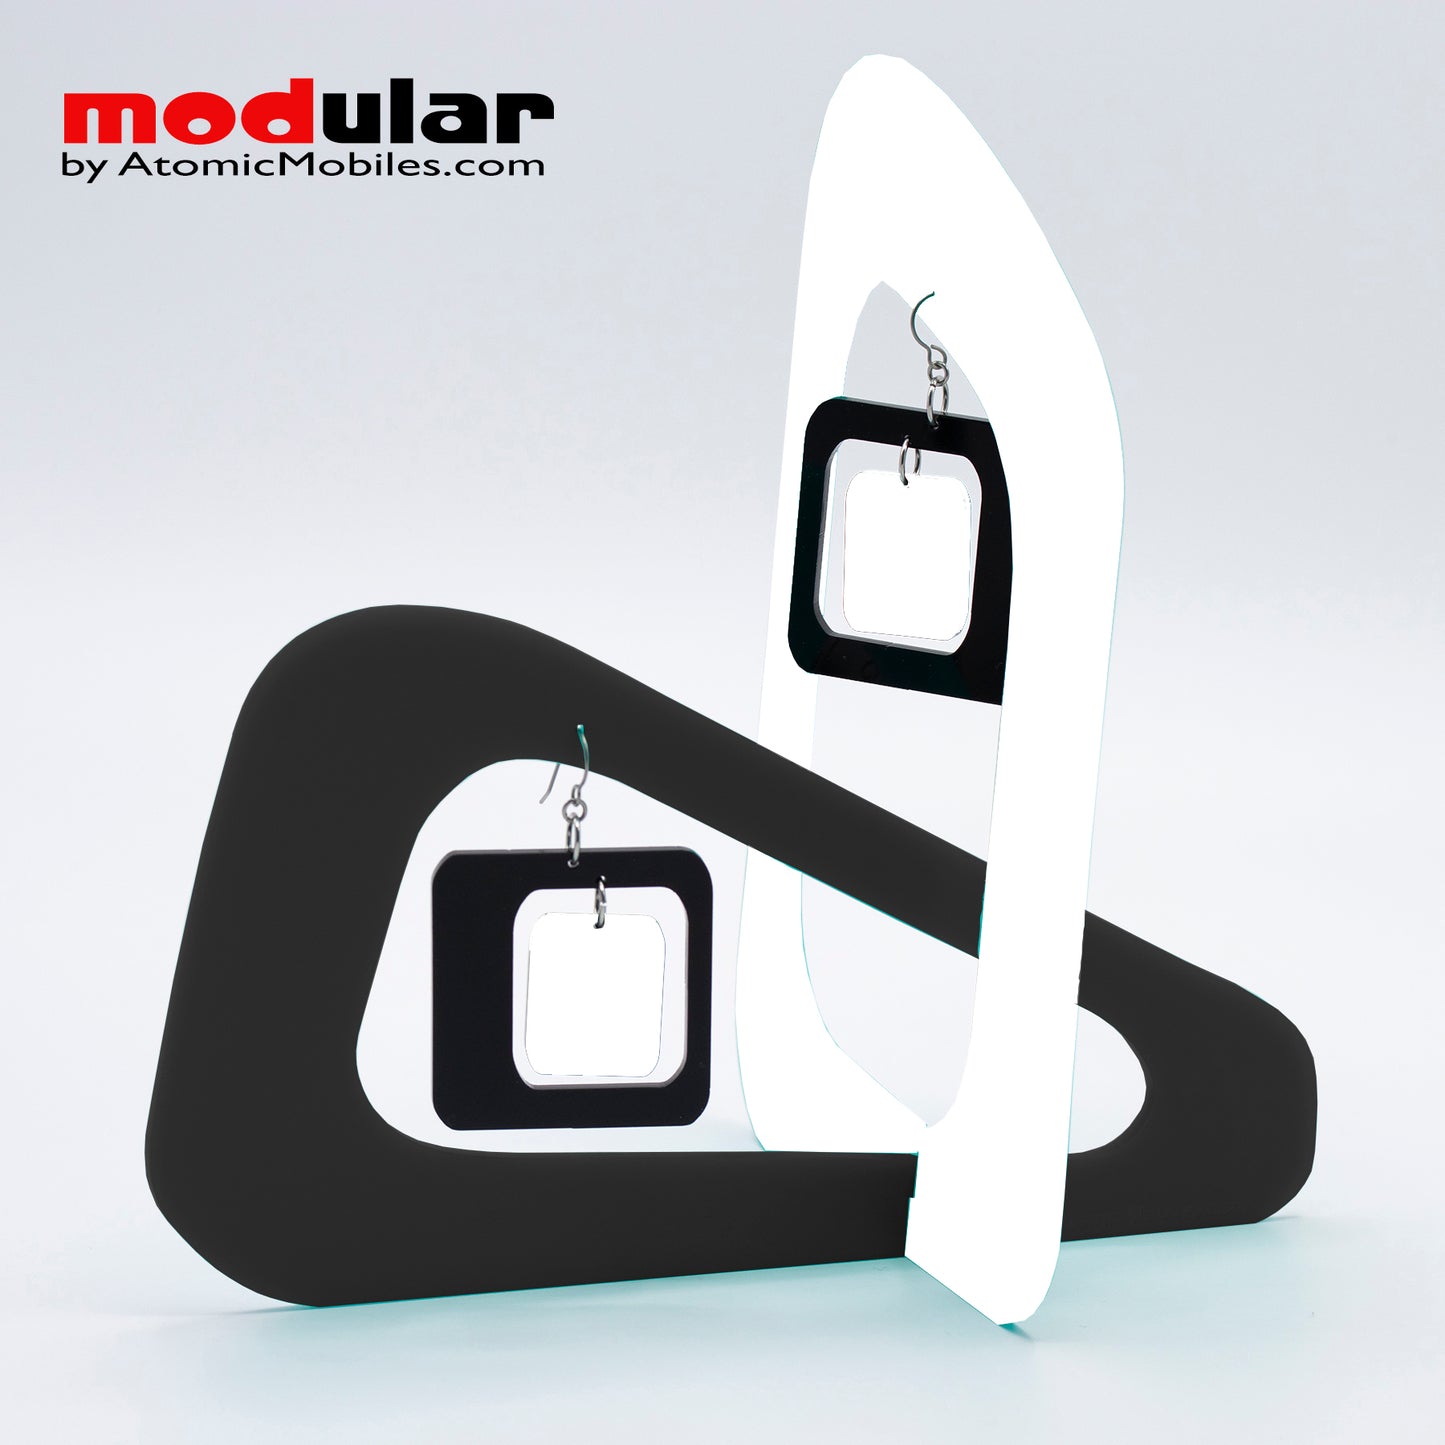 Handmade Coolsville mod style earrings and stabile kinetic modern art sculpture in White and Black by AtomicMobiles.com